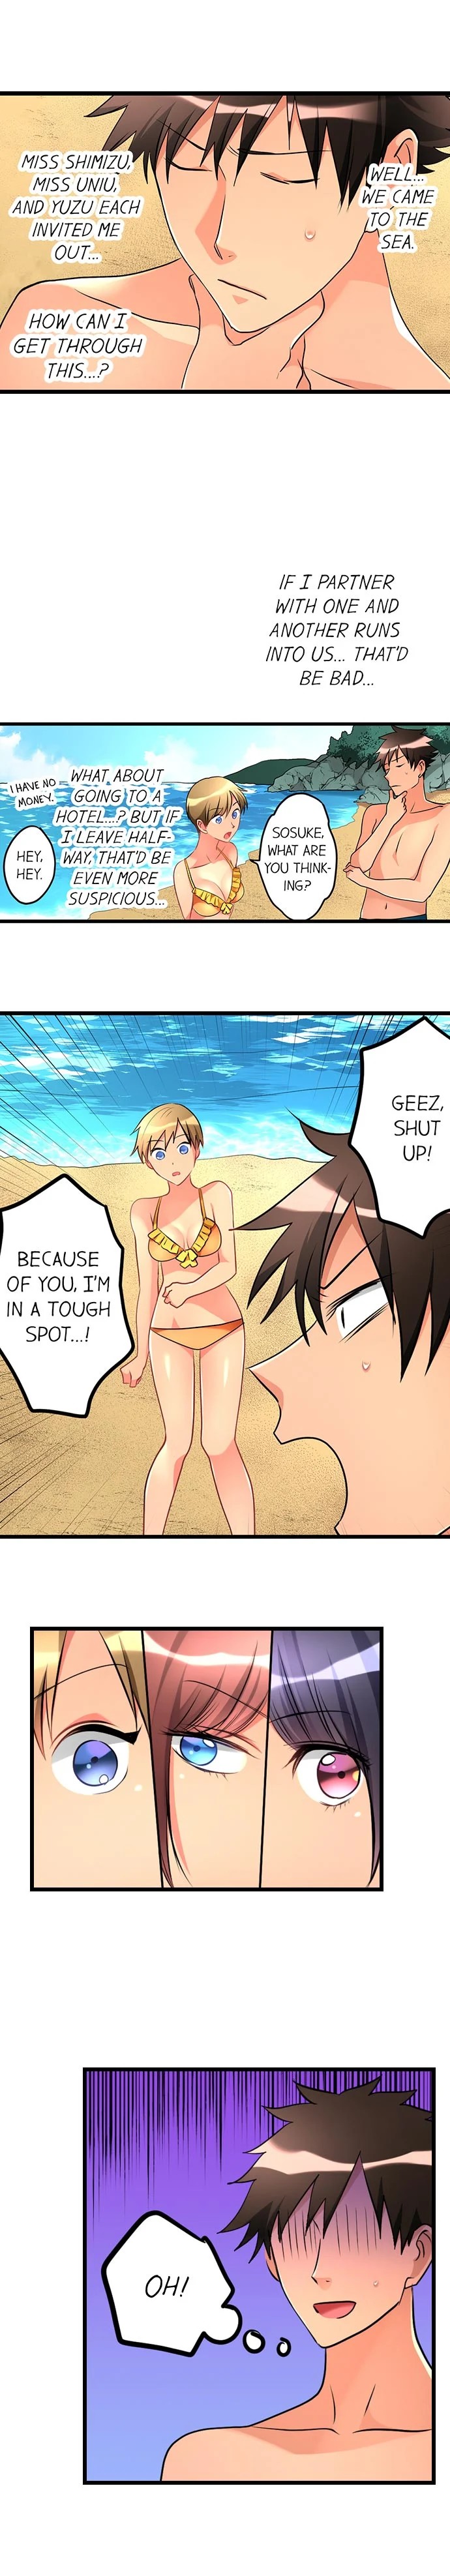 What She Fell On Was the Tip of My Dick - Chapter 40 Page 3